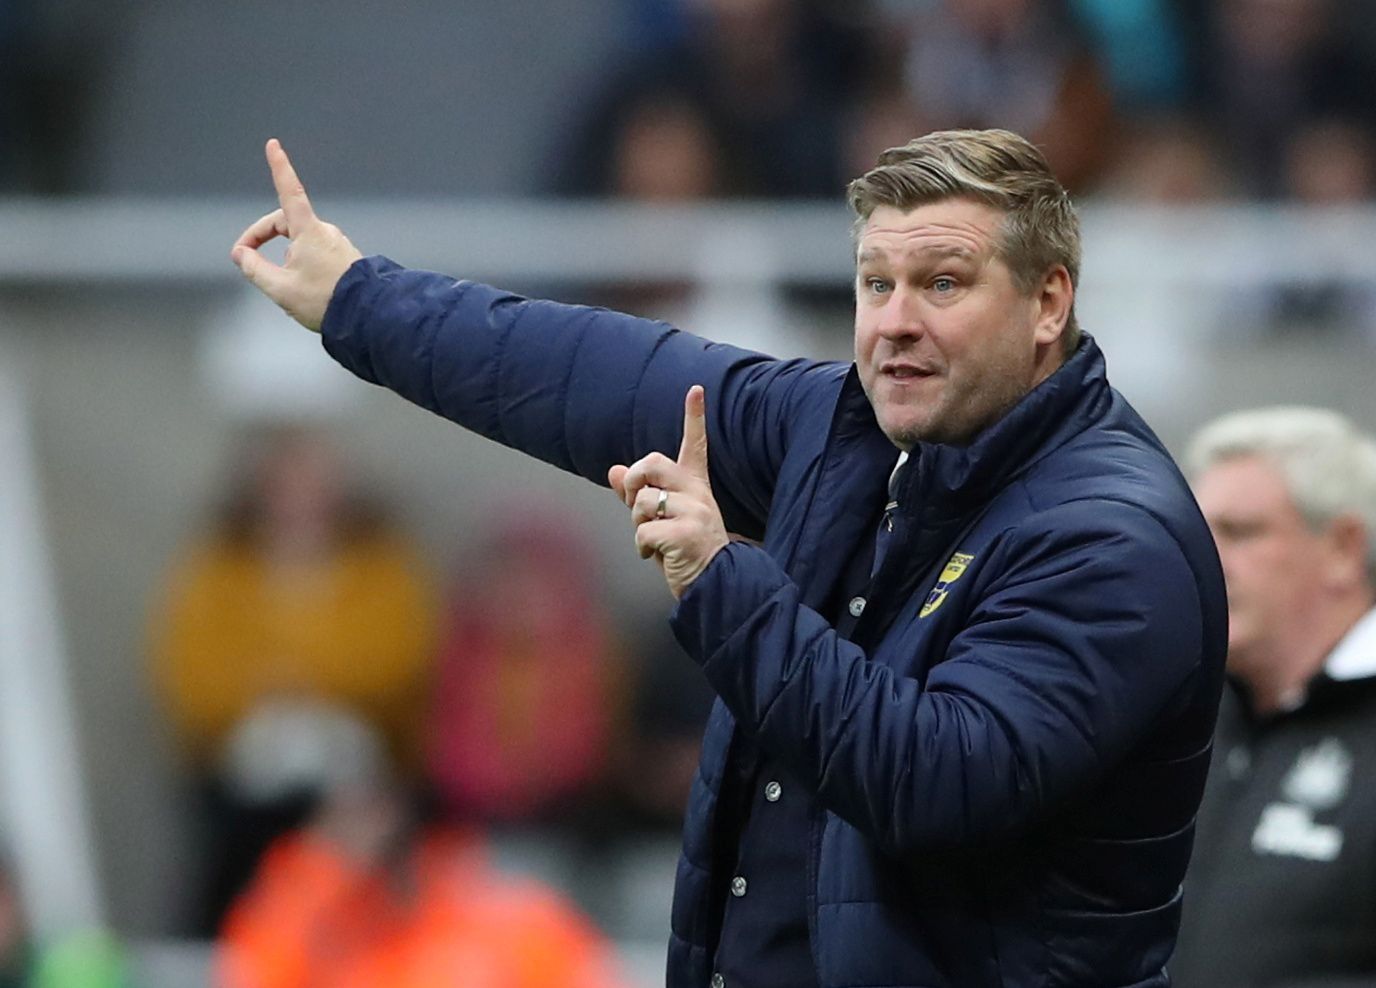 Soccer Football - FA Cup Fourth Round - Newcastle United v Oxford United - St James' Park, Newcastle, Britain - January 25, 2020  Oxford United manager Karl Robinson   REUTERS/Scott Heppell